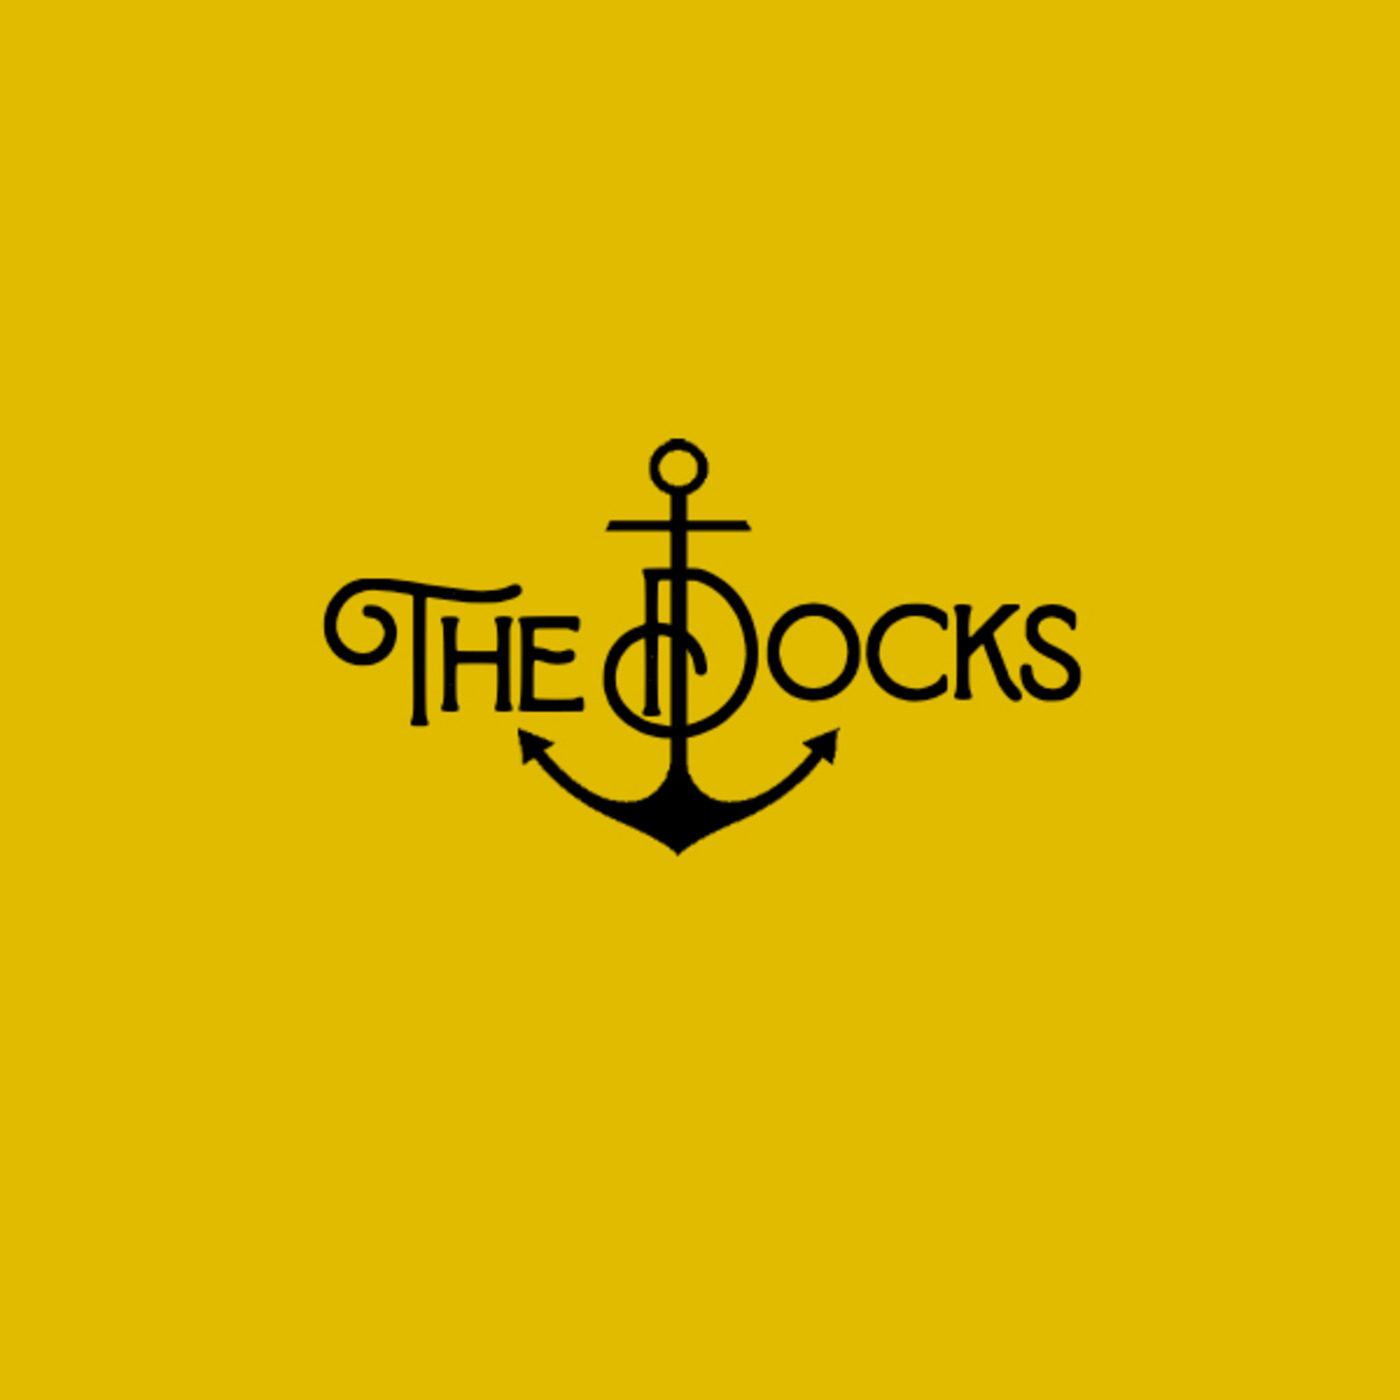 By: The Docks